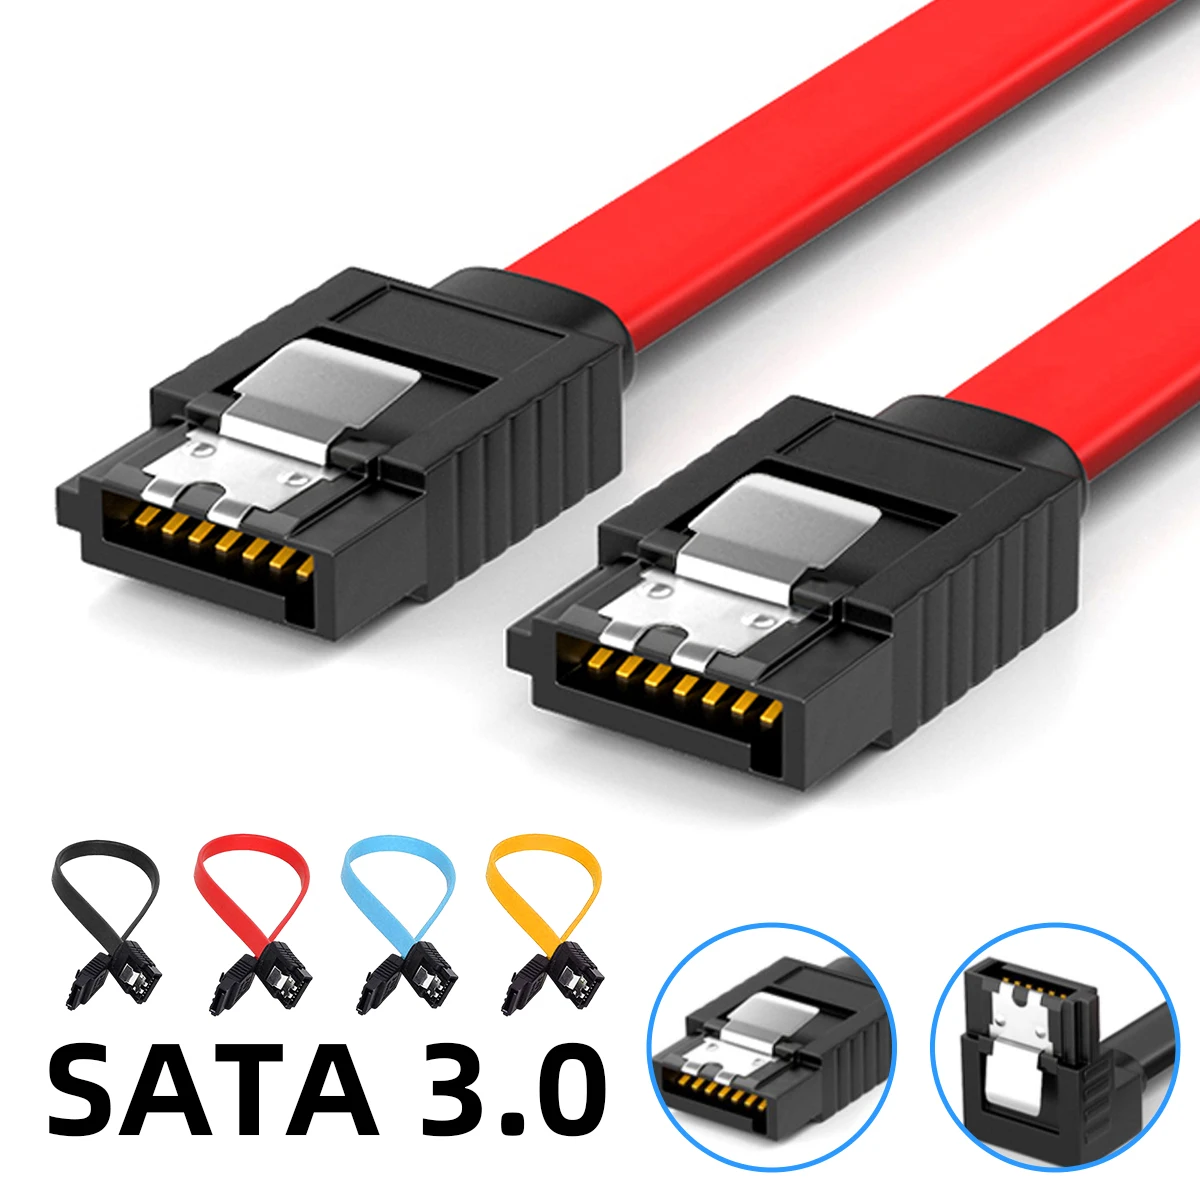 

SATA 3.0 6Gb/s 50cm Hard Disk Drive Data Serial Straight Elbow Cable SATA Cable for HDD SSD Cord line 7pin sata cable Connection